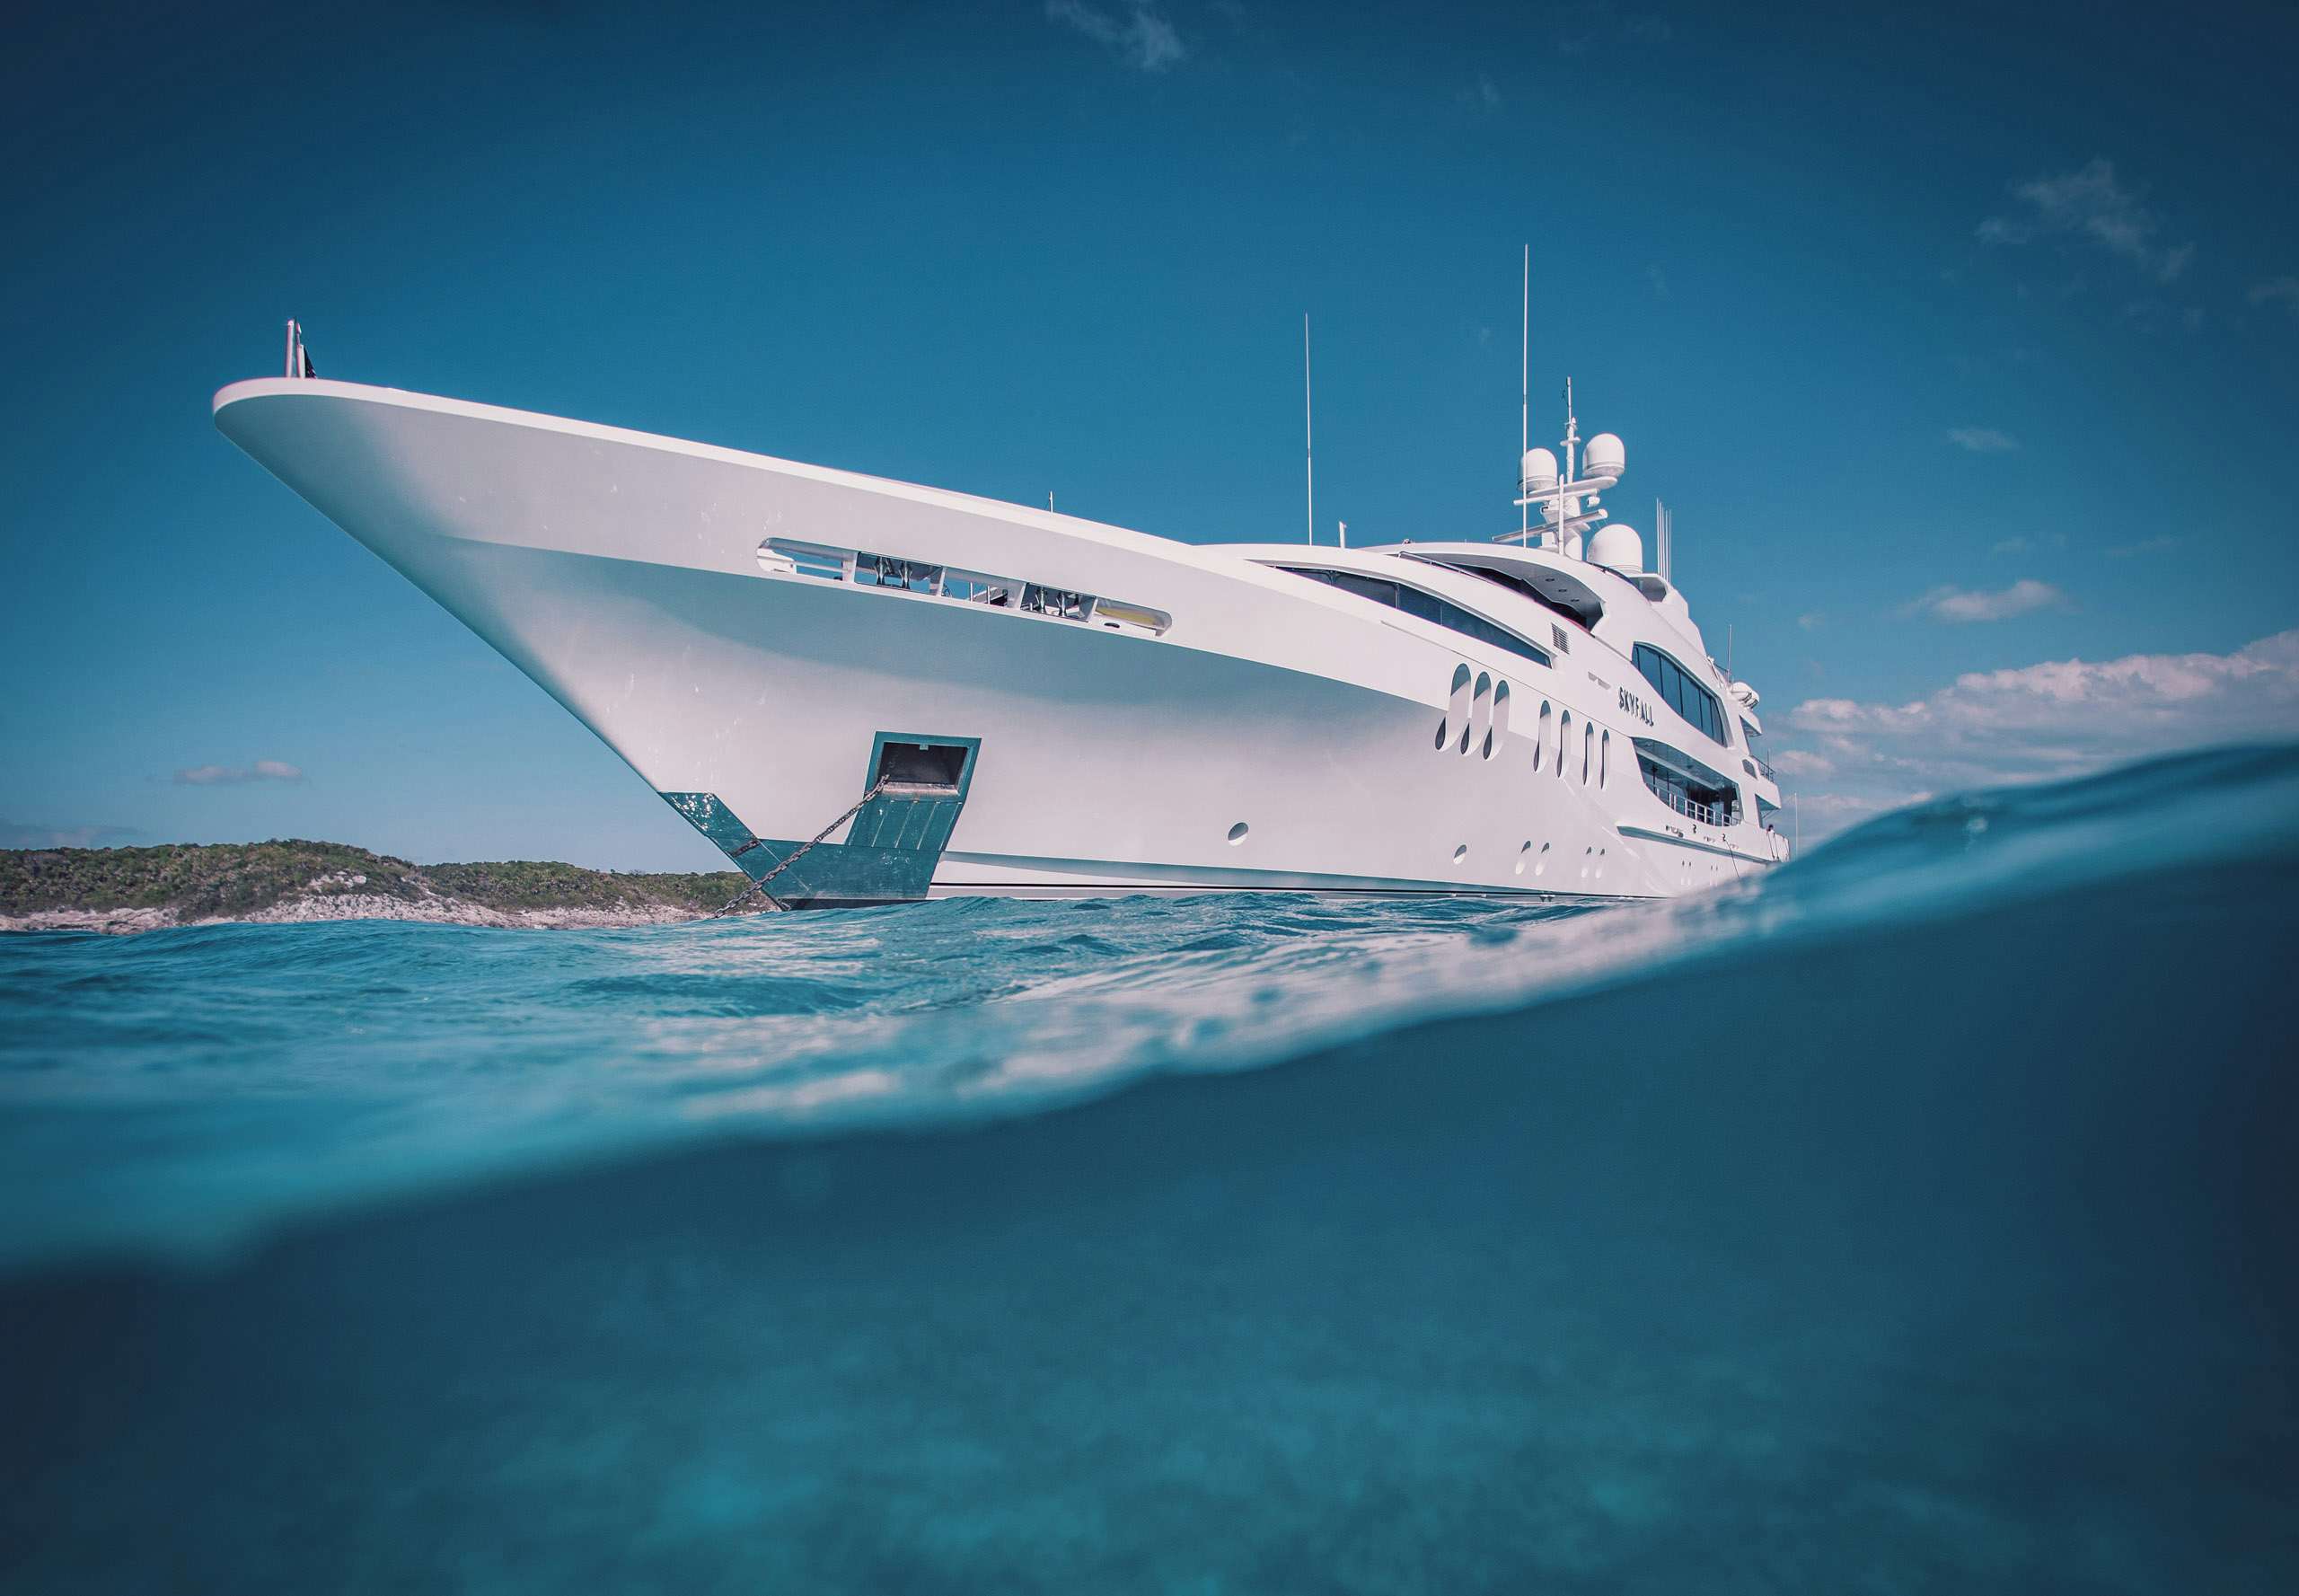 Yacht anchored at clear Caribbean waters